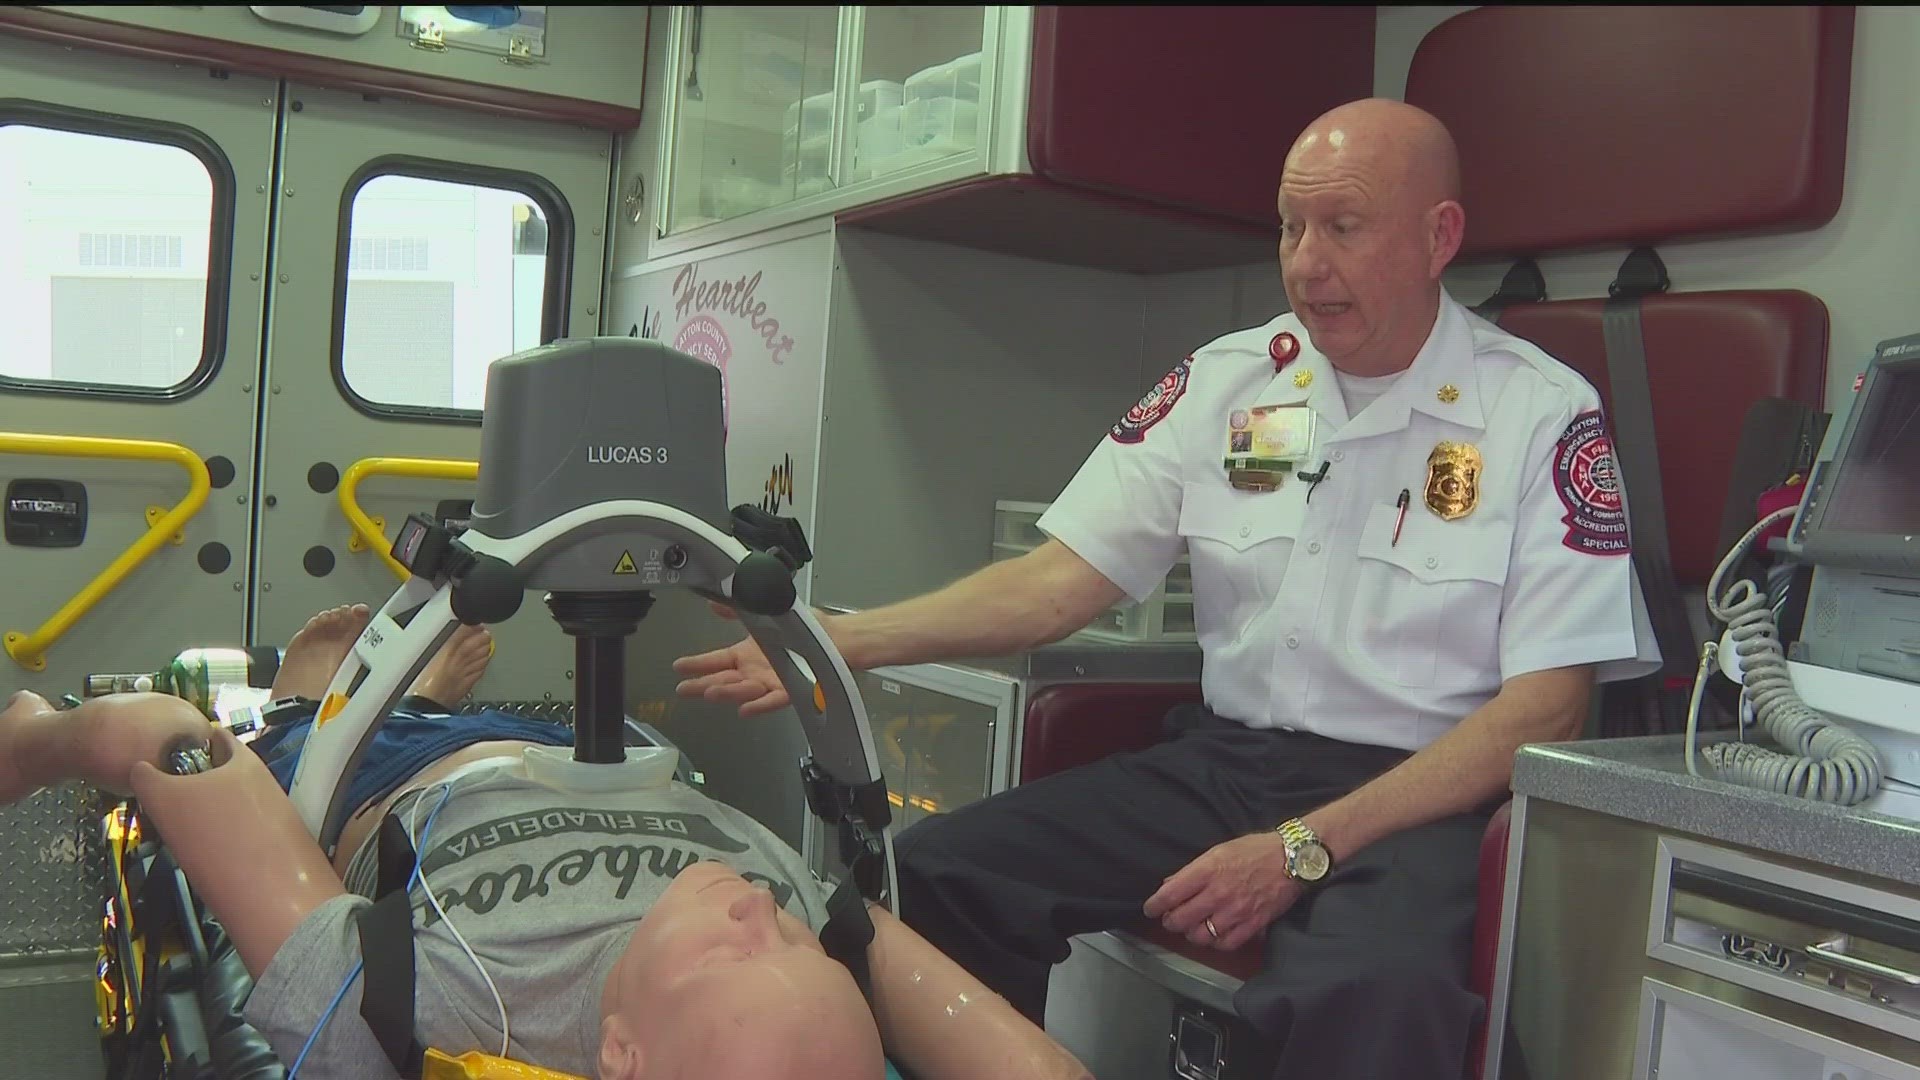 New hands-free CPR machine to help better save lives | 11alive.com